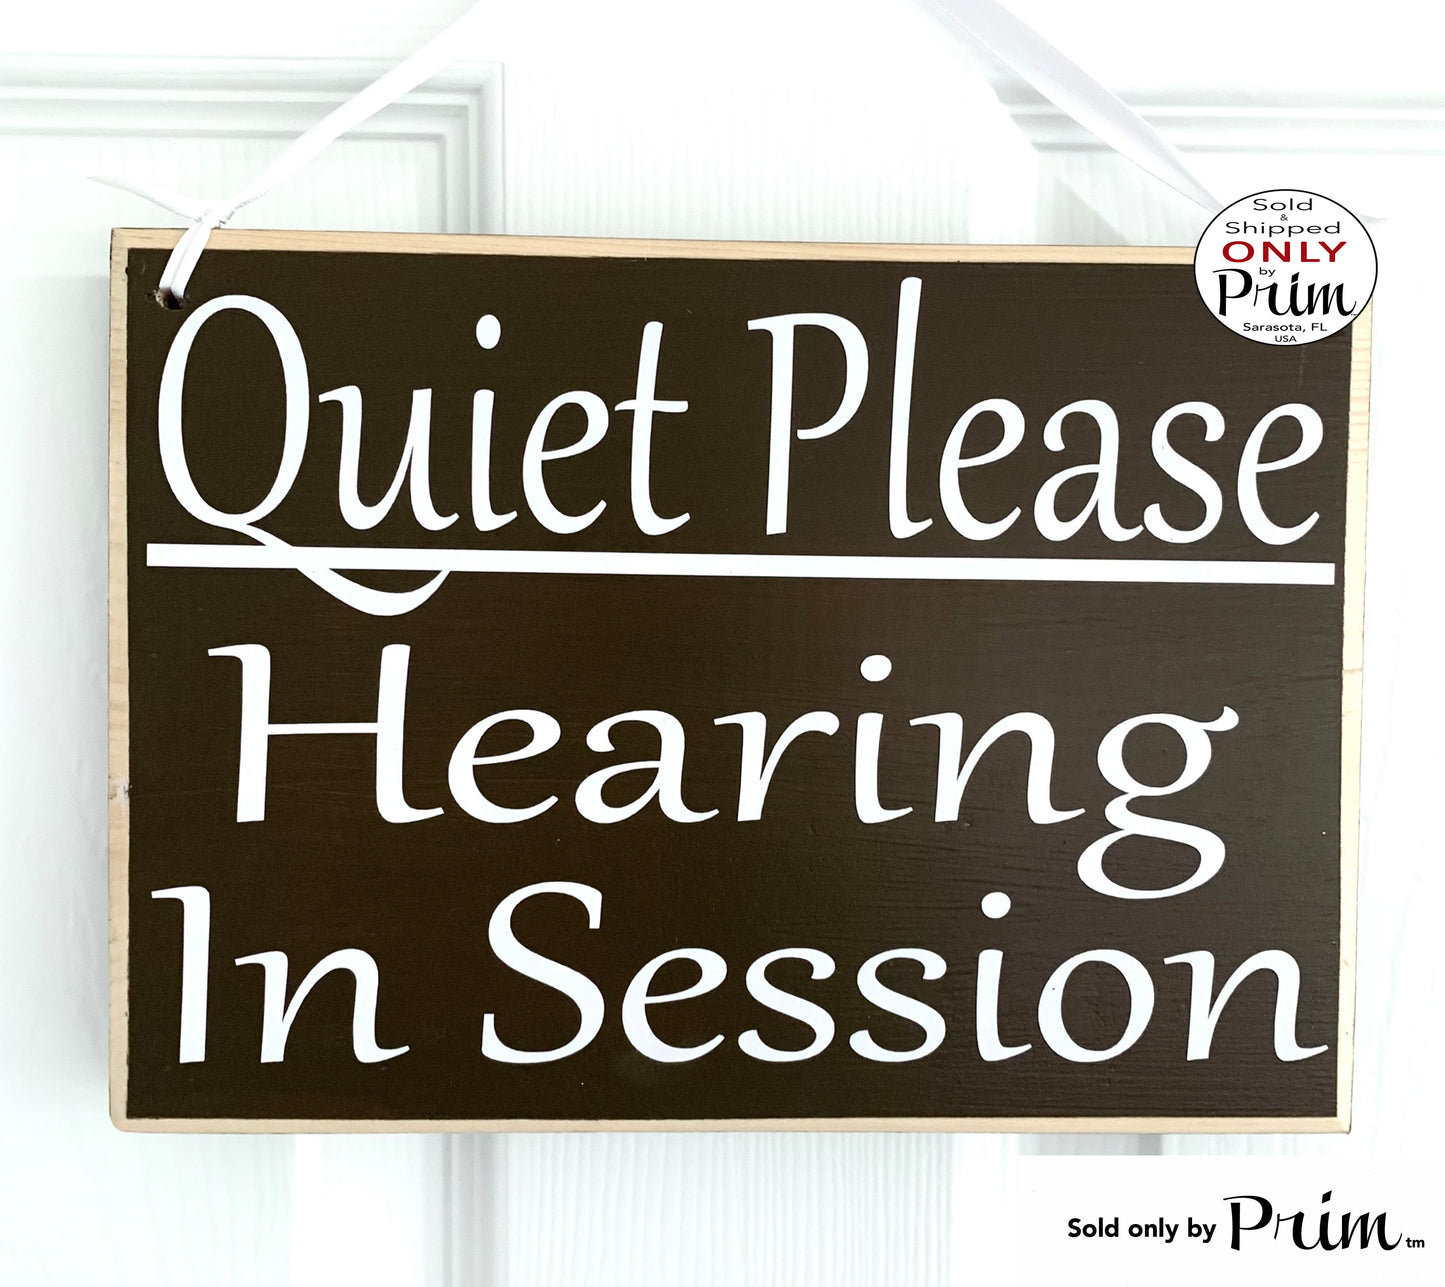 Designs by Prim 10x8 Quiet Please Deposition In Session Custom Wood Sign | Mediation Court Progress Meeting In Progress Business Corporate Mediating Plaque